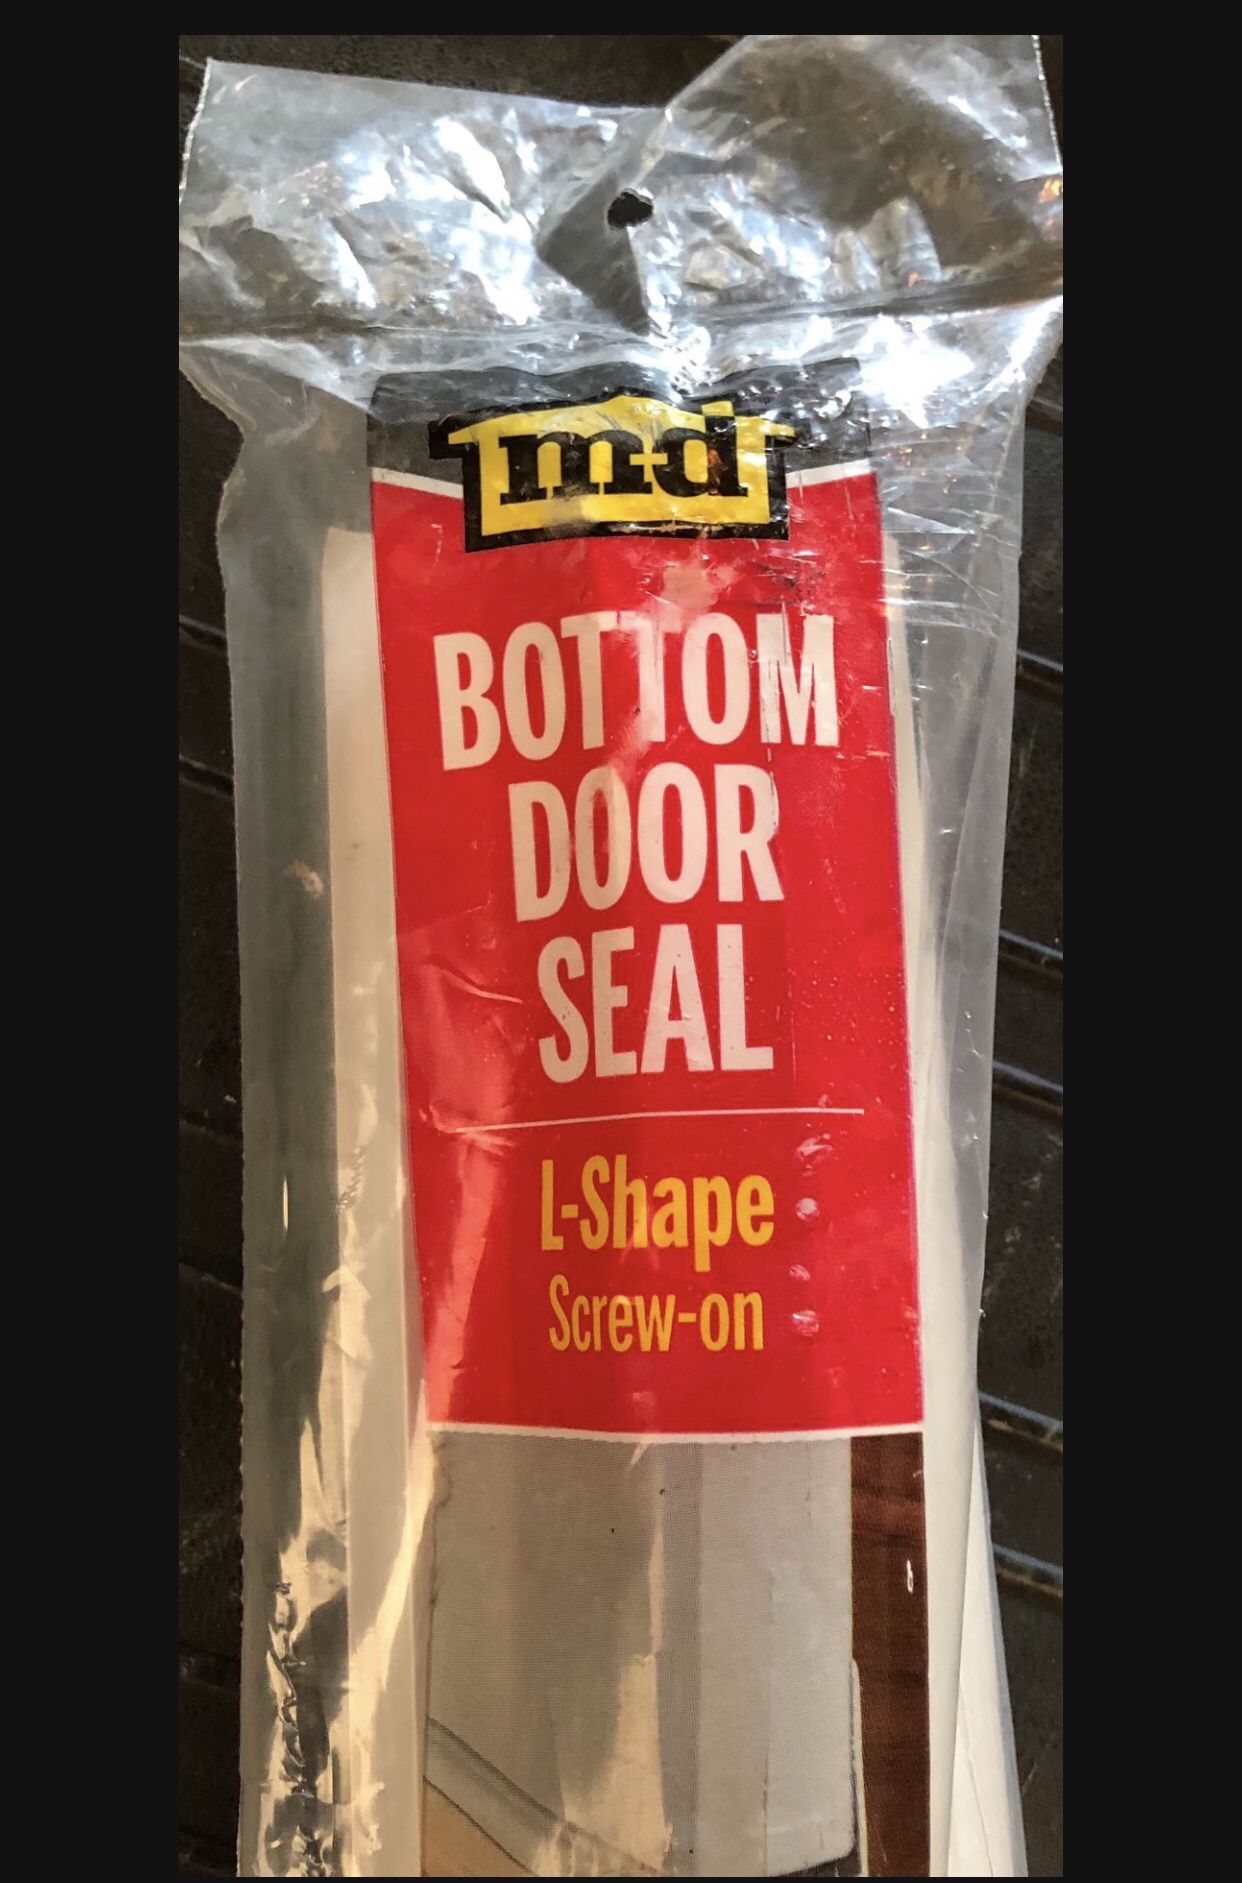 MD BOTTOM DOOR SEAL 36”/ WHITE VINYL with FINS, L - SHAPE SCREWS ON. SEALS GAPS UP TO 3/